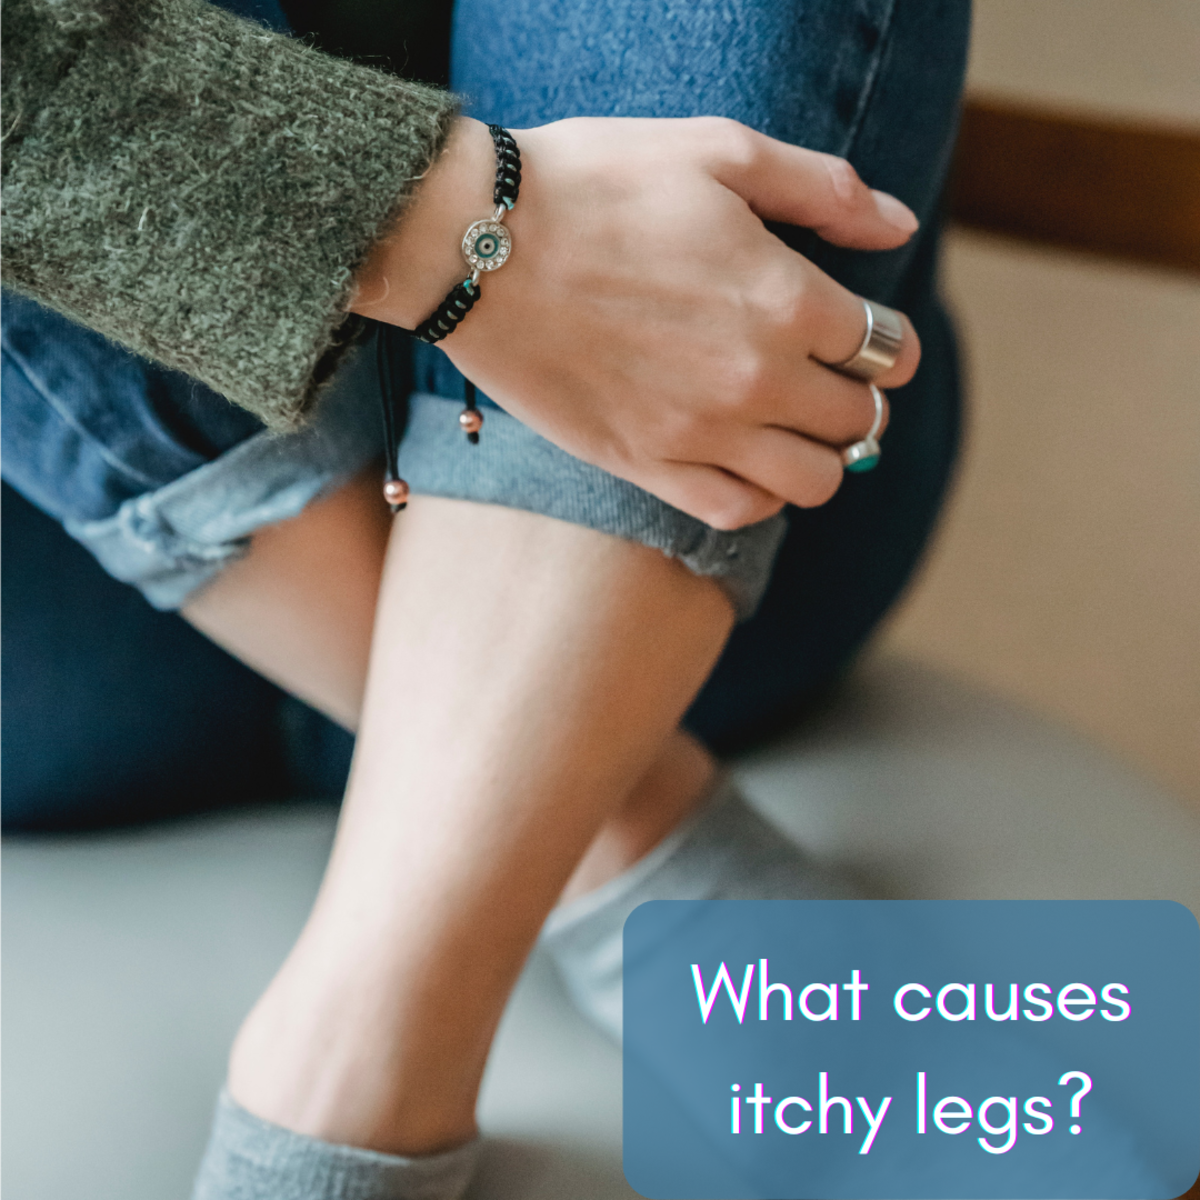 12 Causes of Itchy Legs: Photos and Remedies